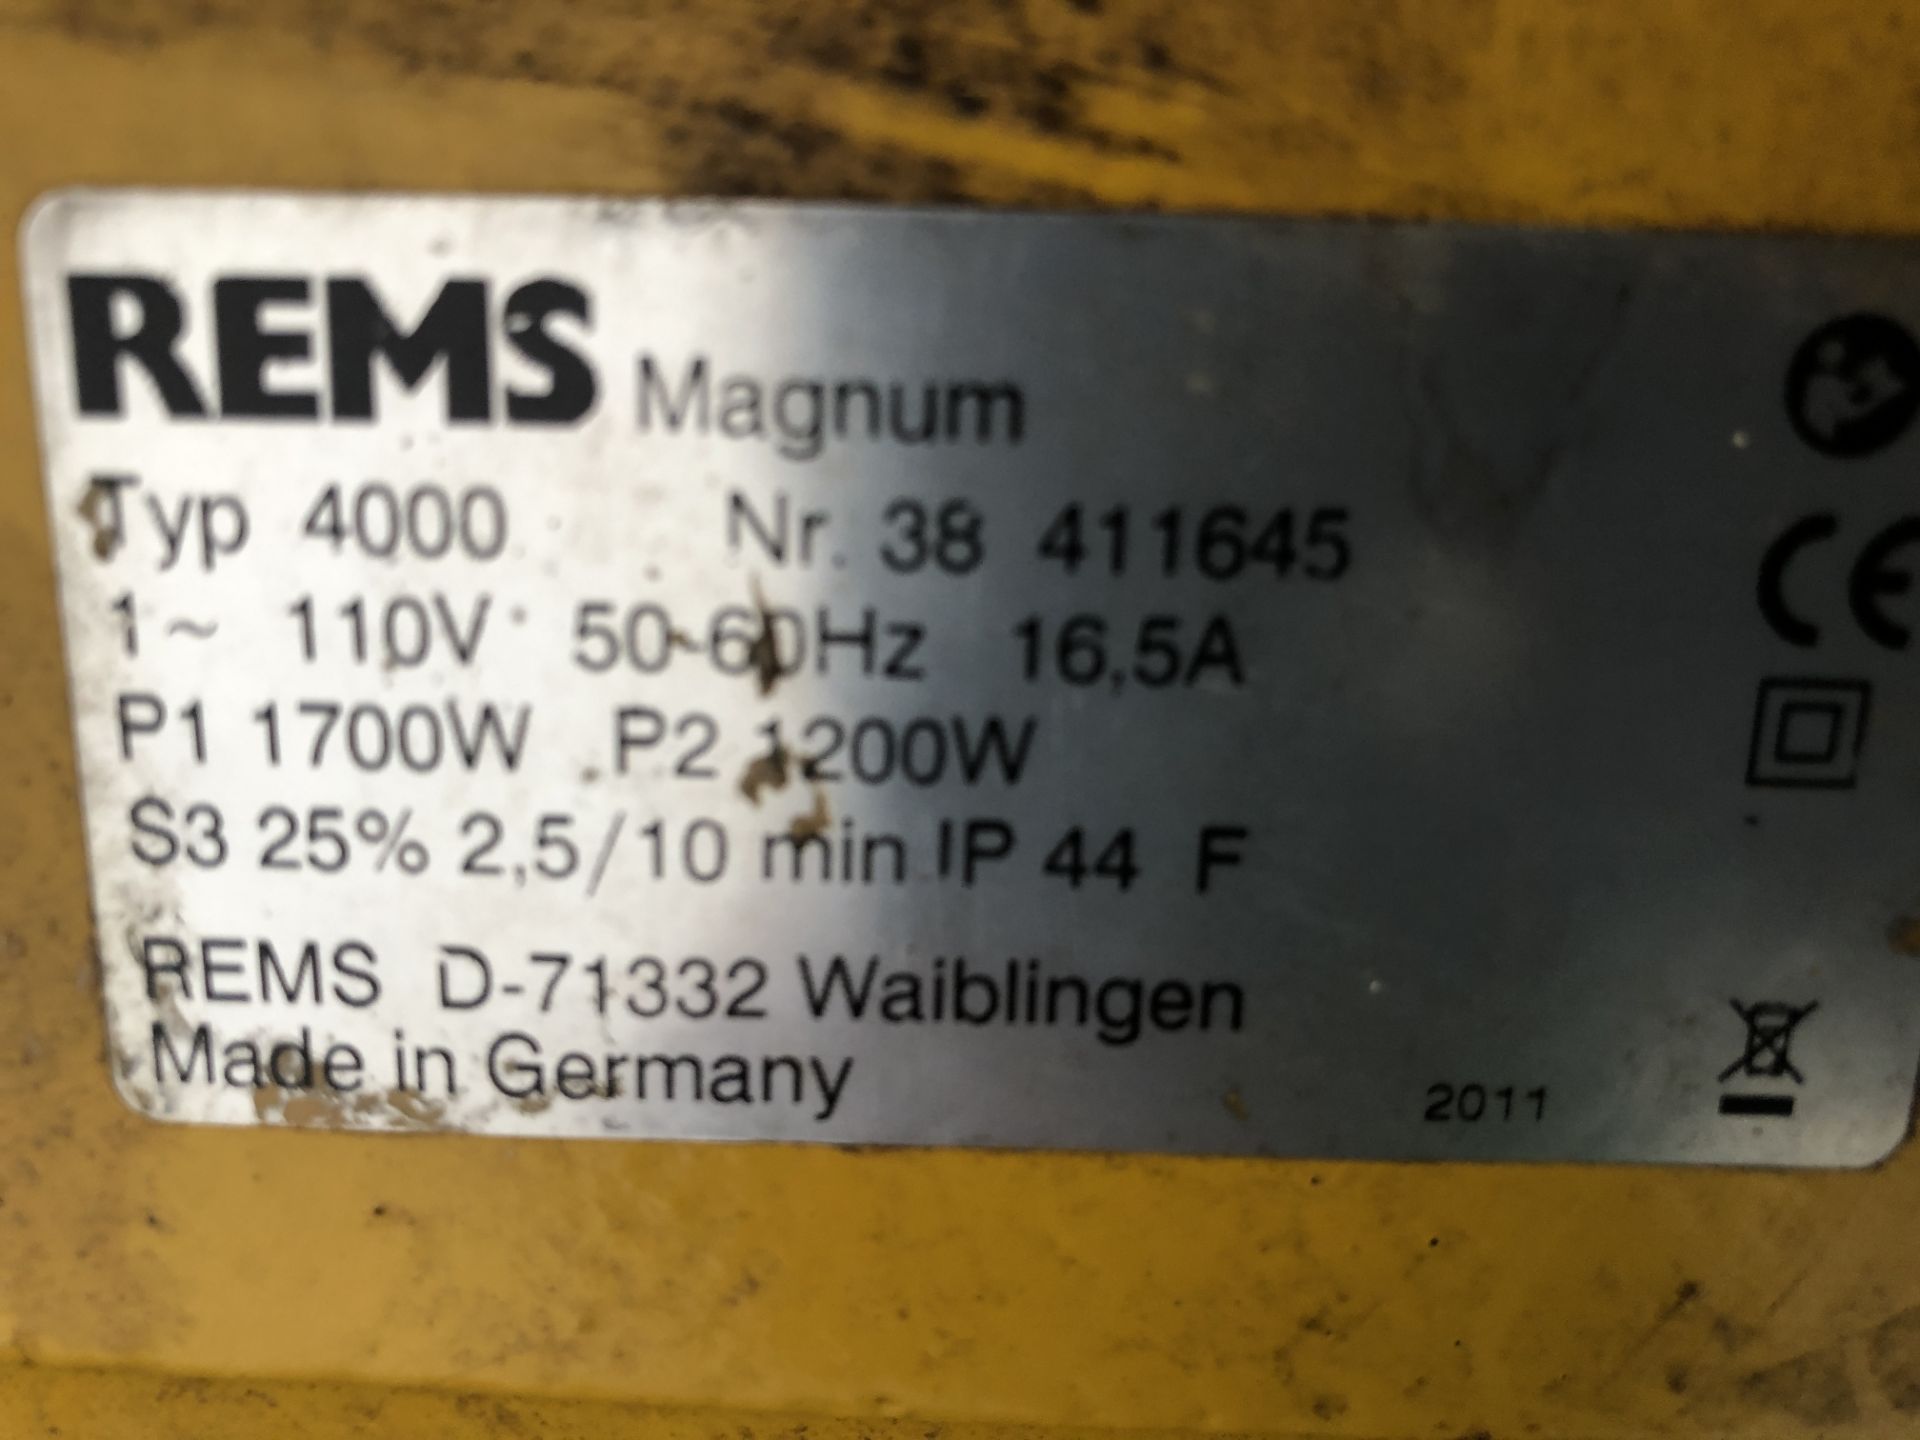 REMS Magnum Type 4000 Pipe Threader, Serial Number 38411645 on Wheeled Stand (Location: Brentwood. - Image 3 of 4